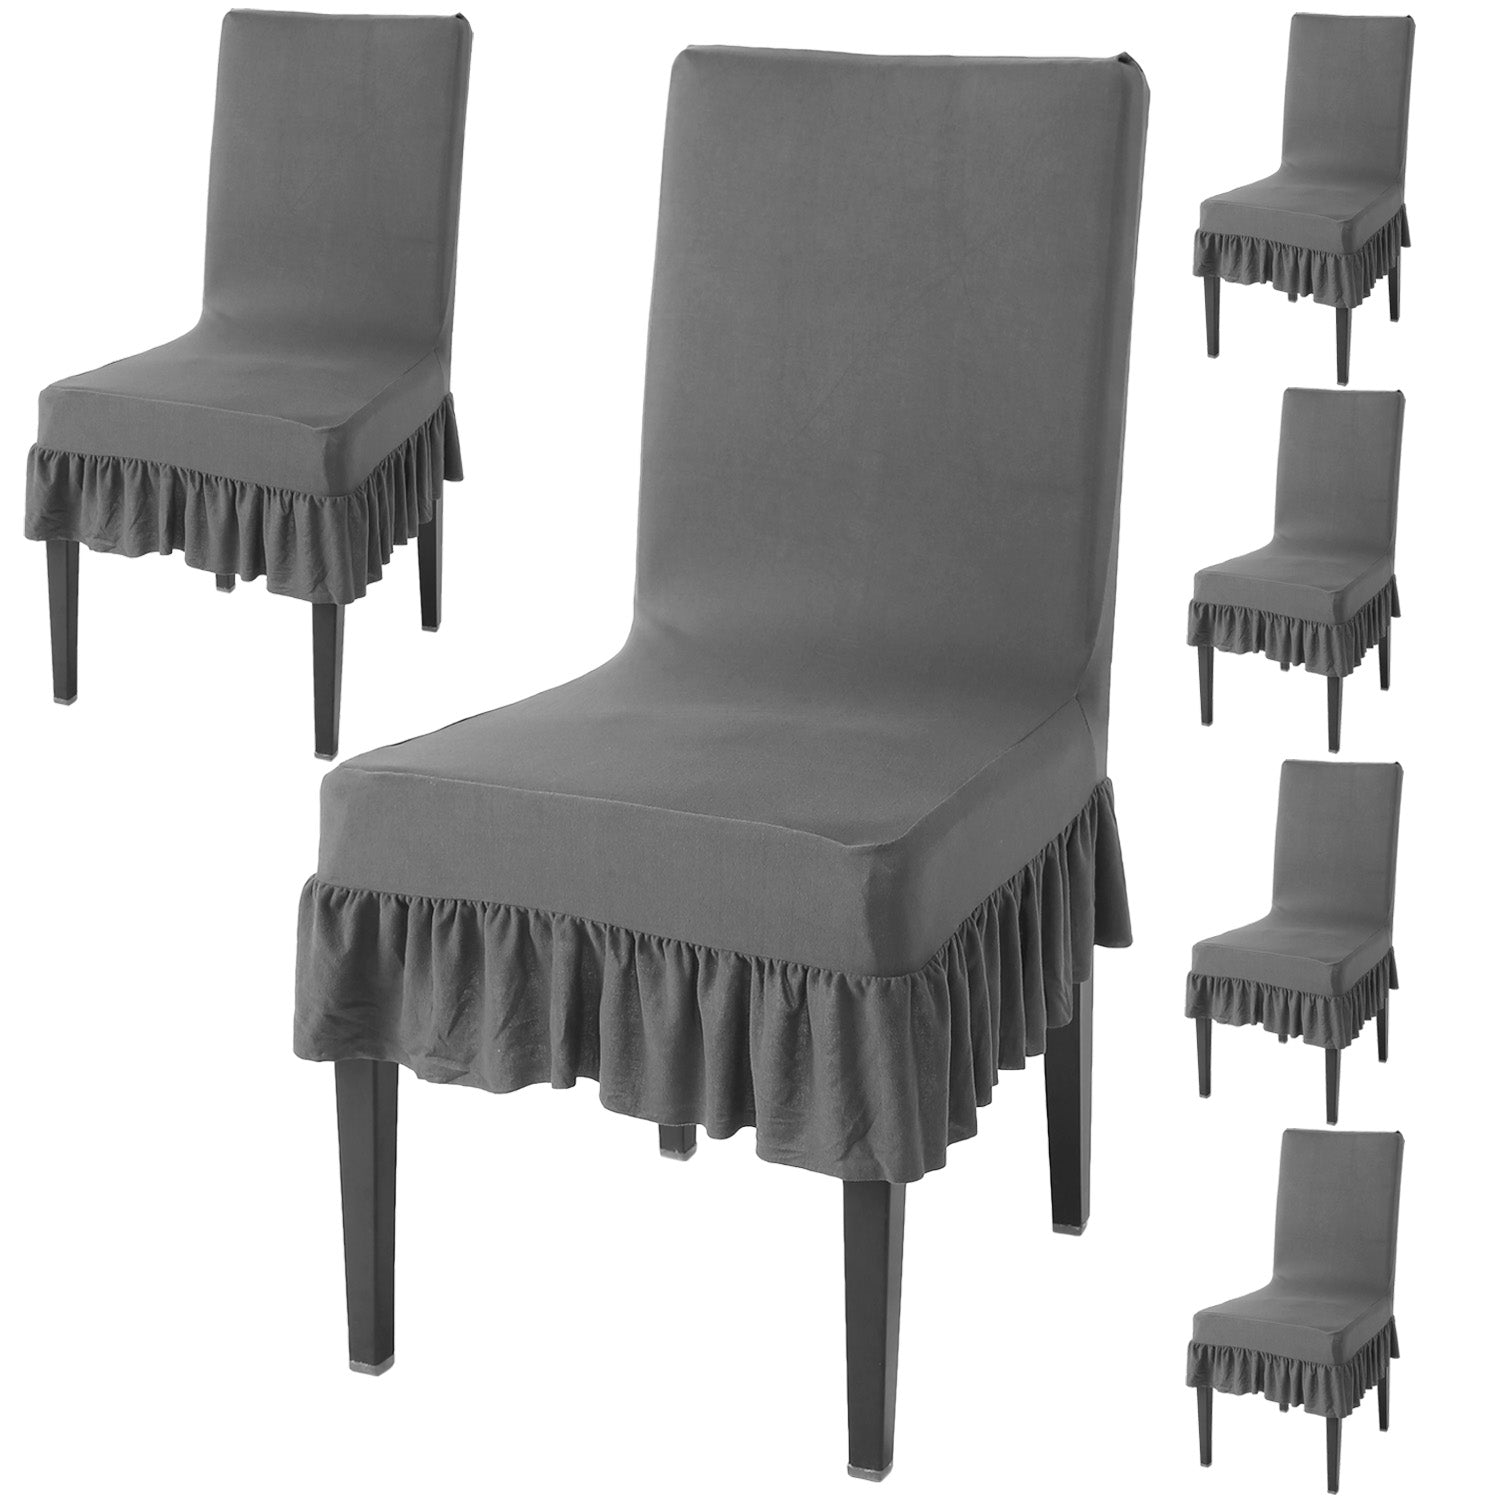 Elastic Stretchable Dining Chair Cover with Frill, Fossil Grey